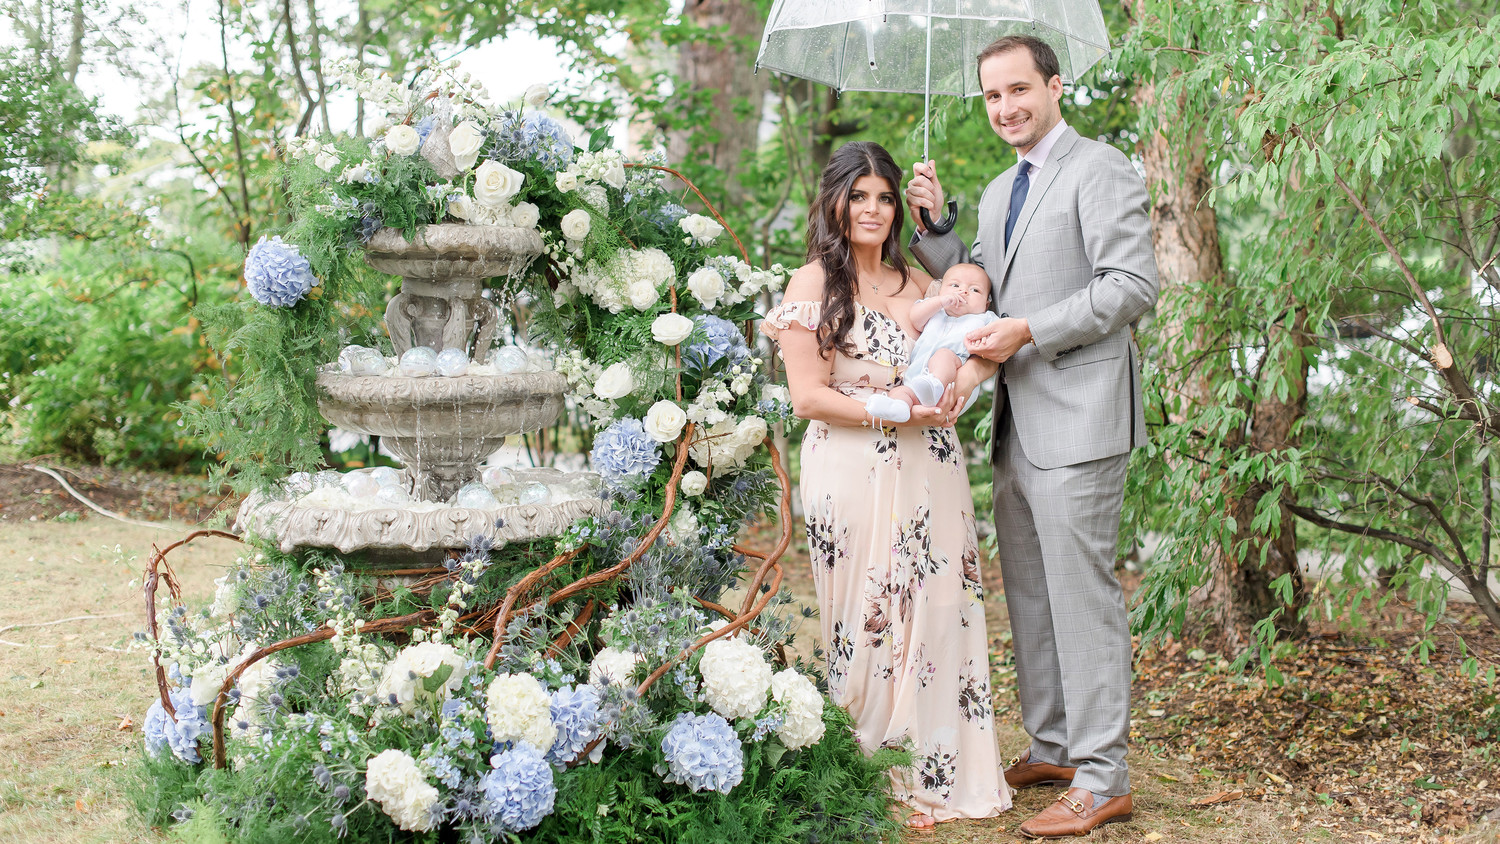 charitable baptism celebration couple with new baby by fountain and flowers